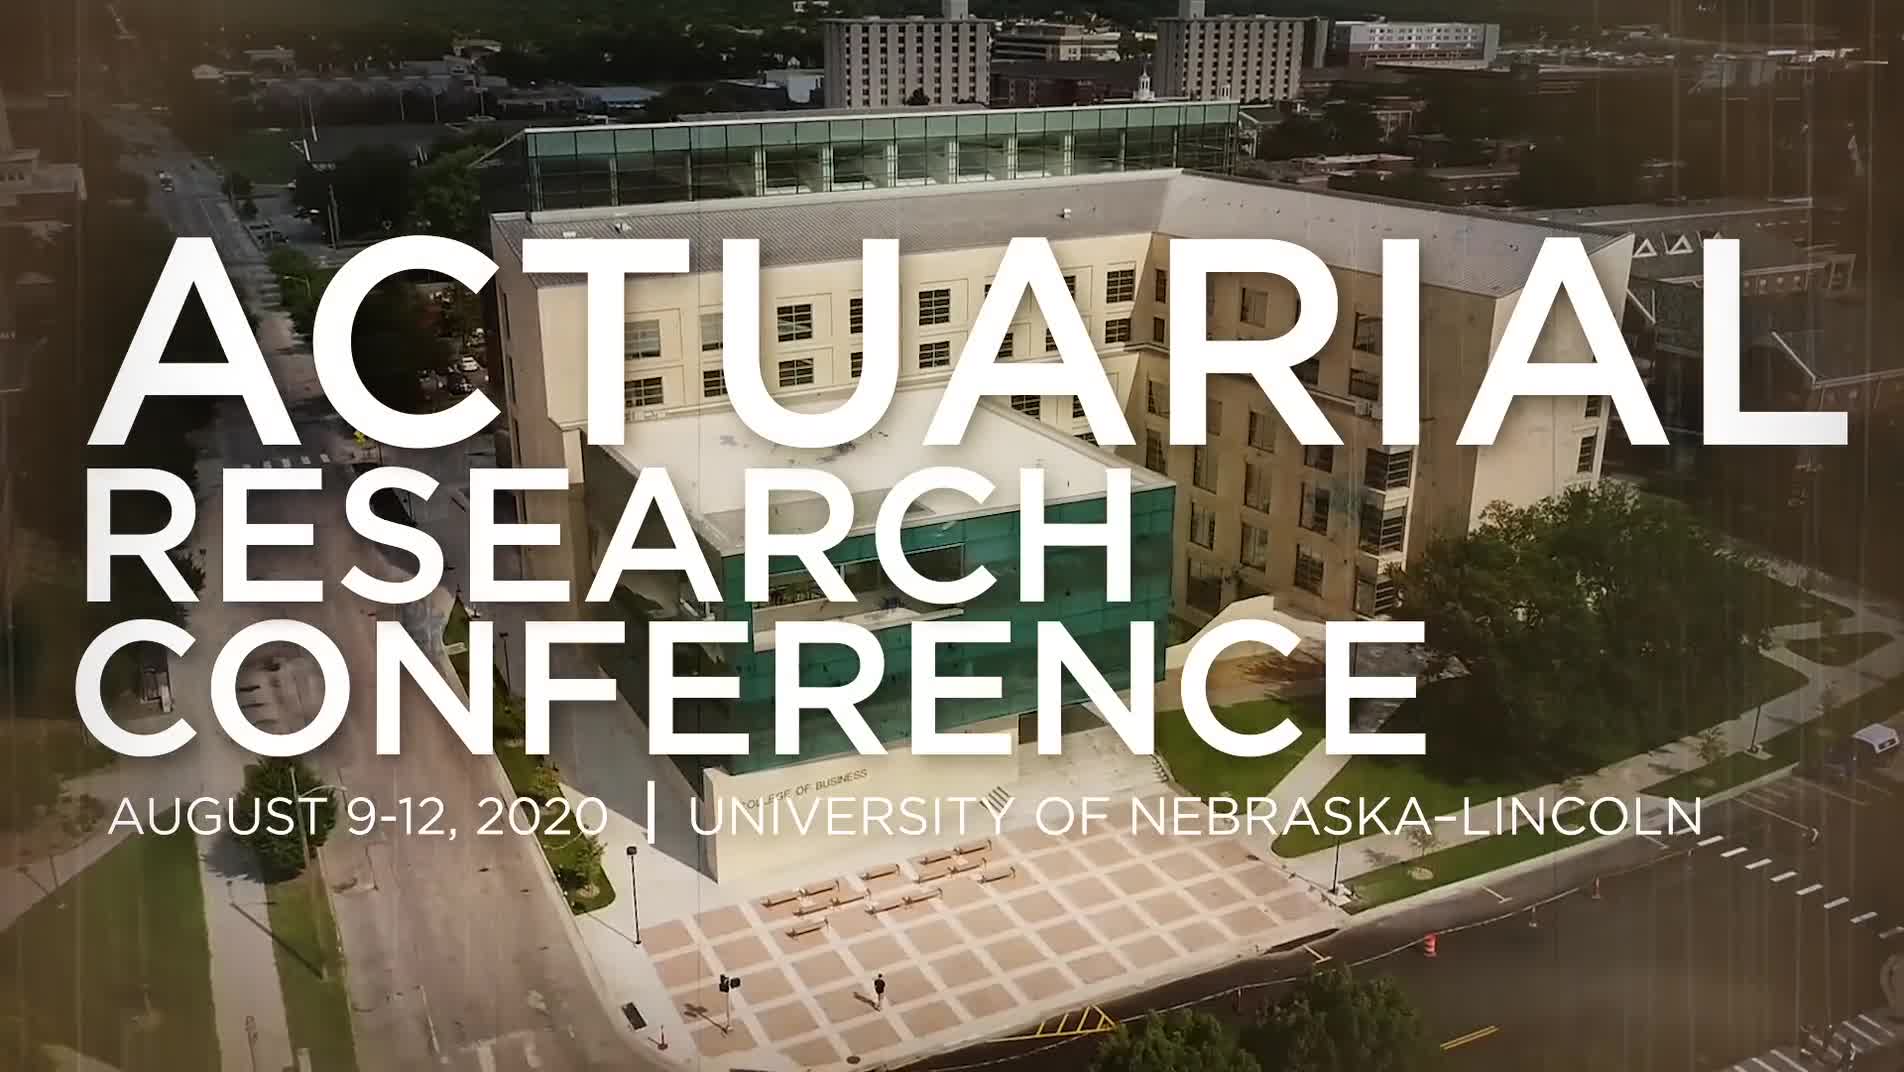 Actuarial Research Conference 2020 Hosted by University of Nebraska